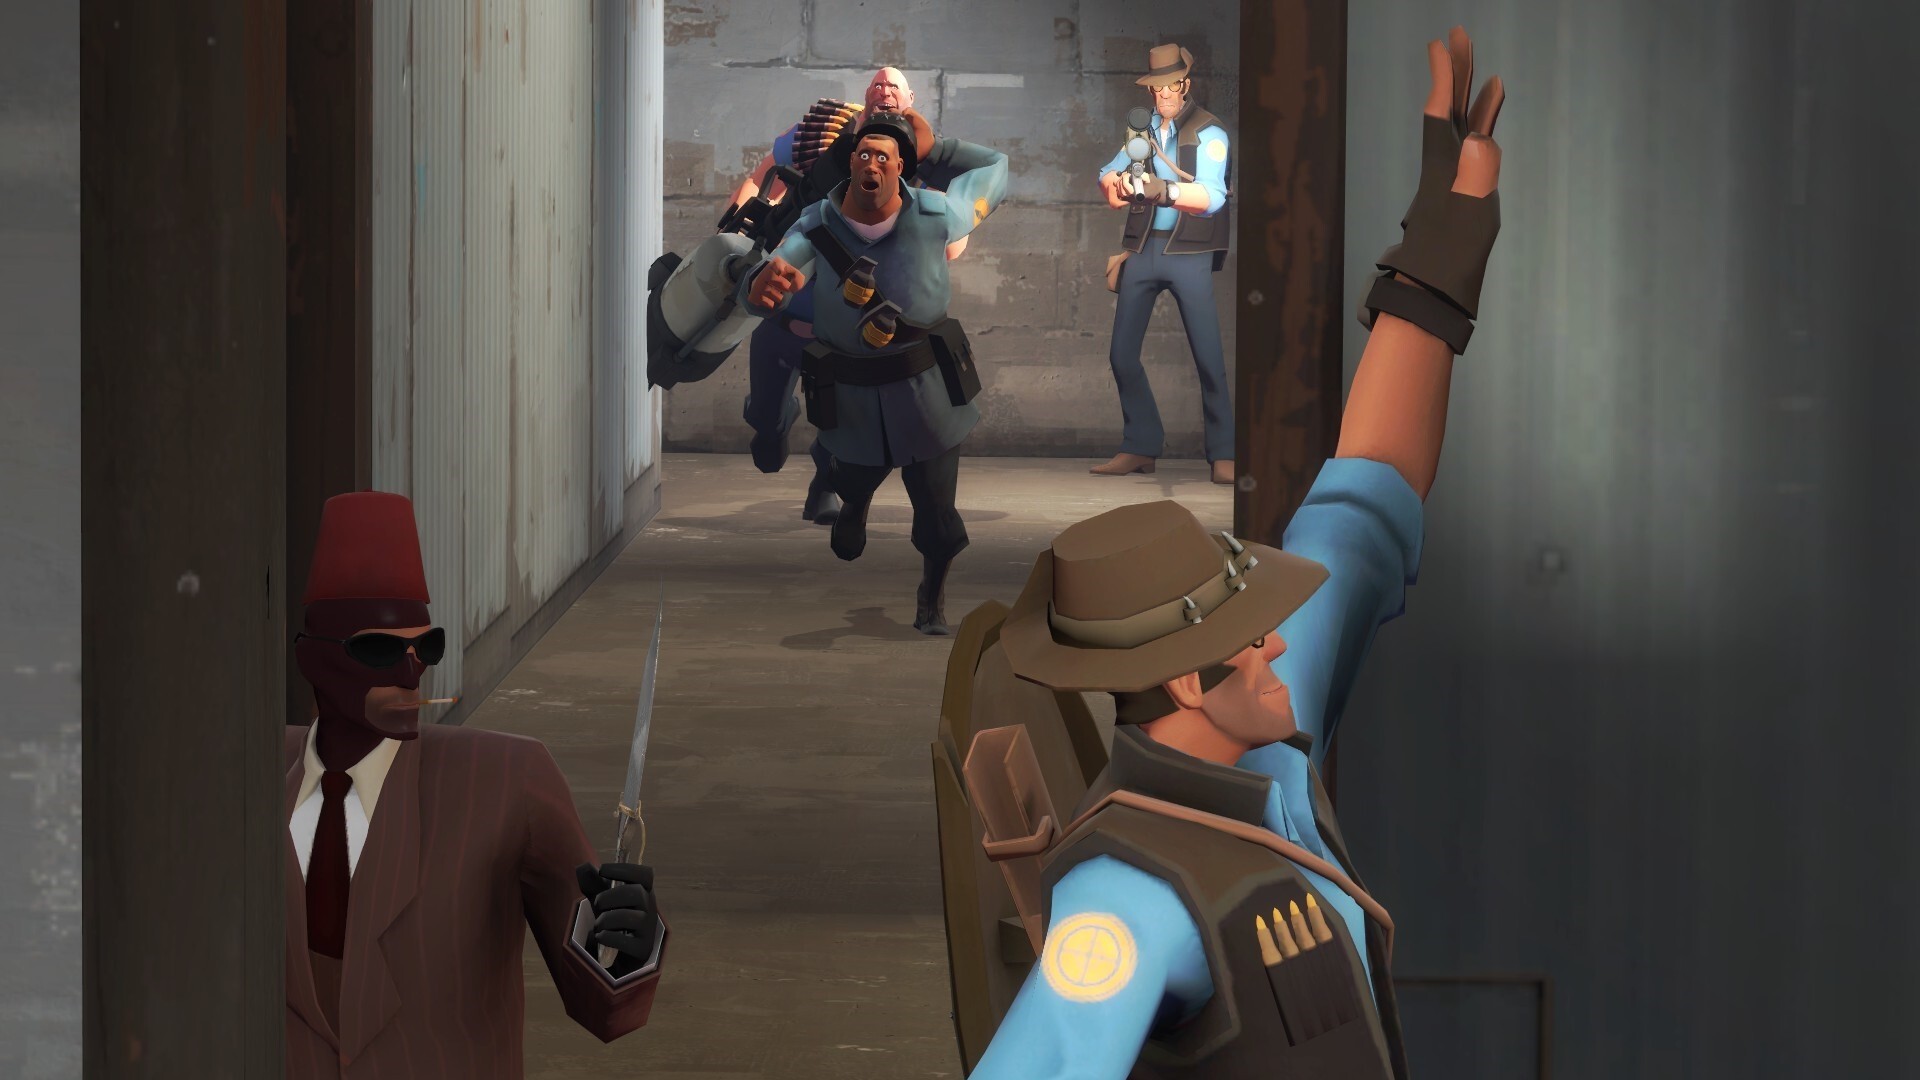 Garry's Mod: Team Fortress 2, A 2007 multiplayer first-person shooter game developed and published by Valve Corporation. 1920x1080 Full HD Background.